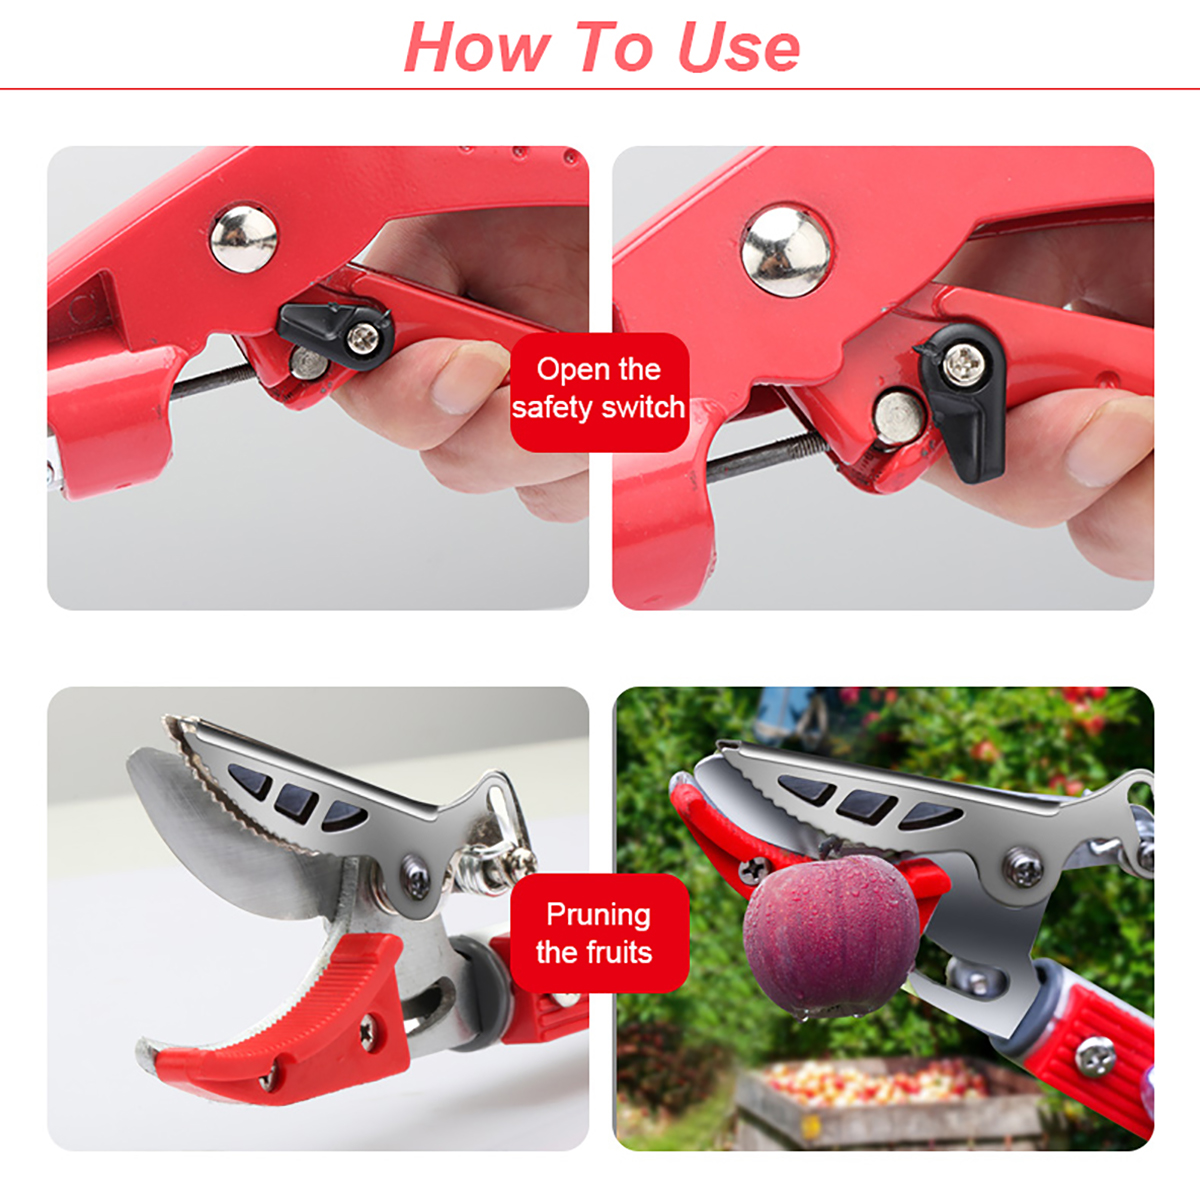 Professional-Grafting-Tool-Pruning-Garden-Shears-for-Cutting-Stems-Light-Branches-of-Trees-Rose-Bush-1601292-3